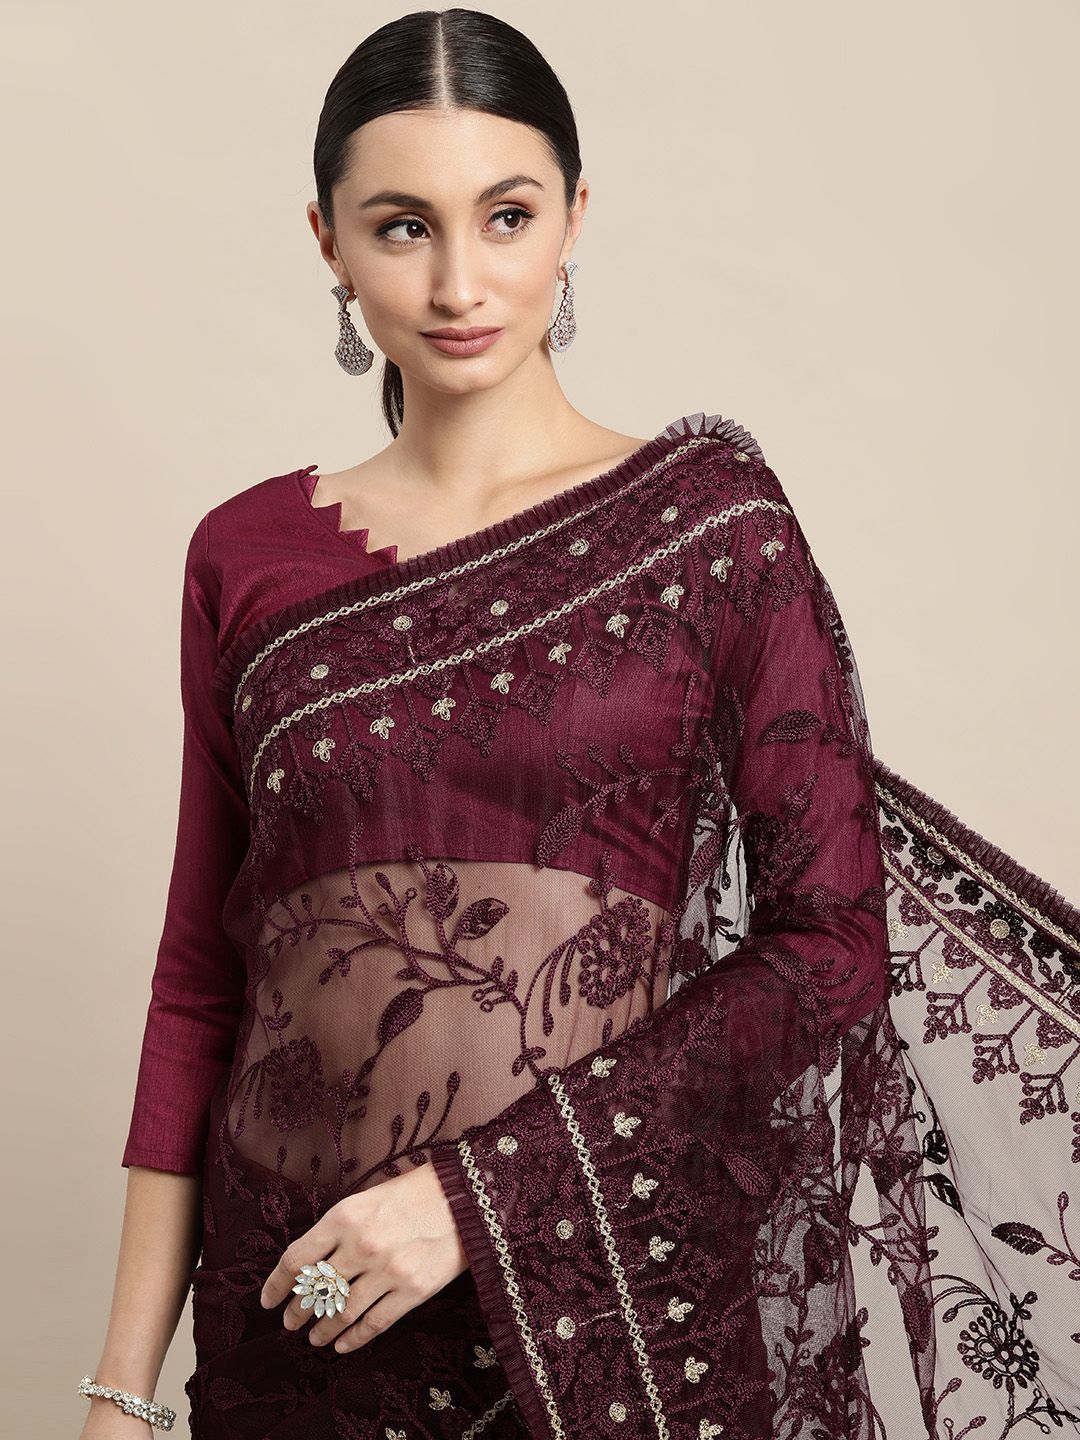 VAIRAGEE Burgundy Floral Embroidered Net Saree Price in India